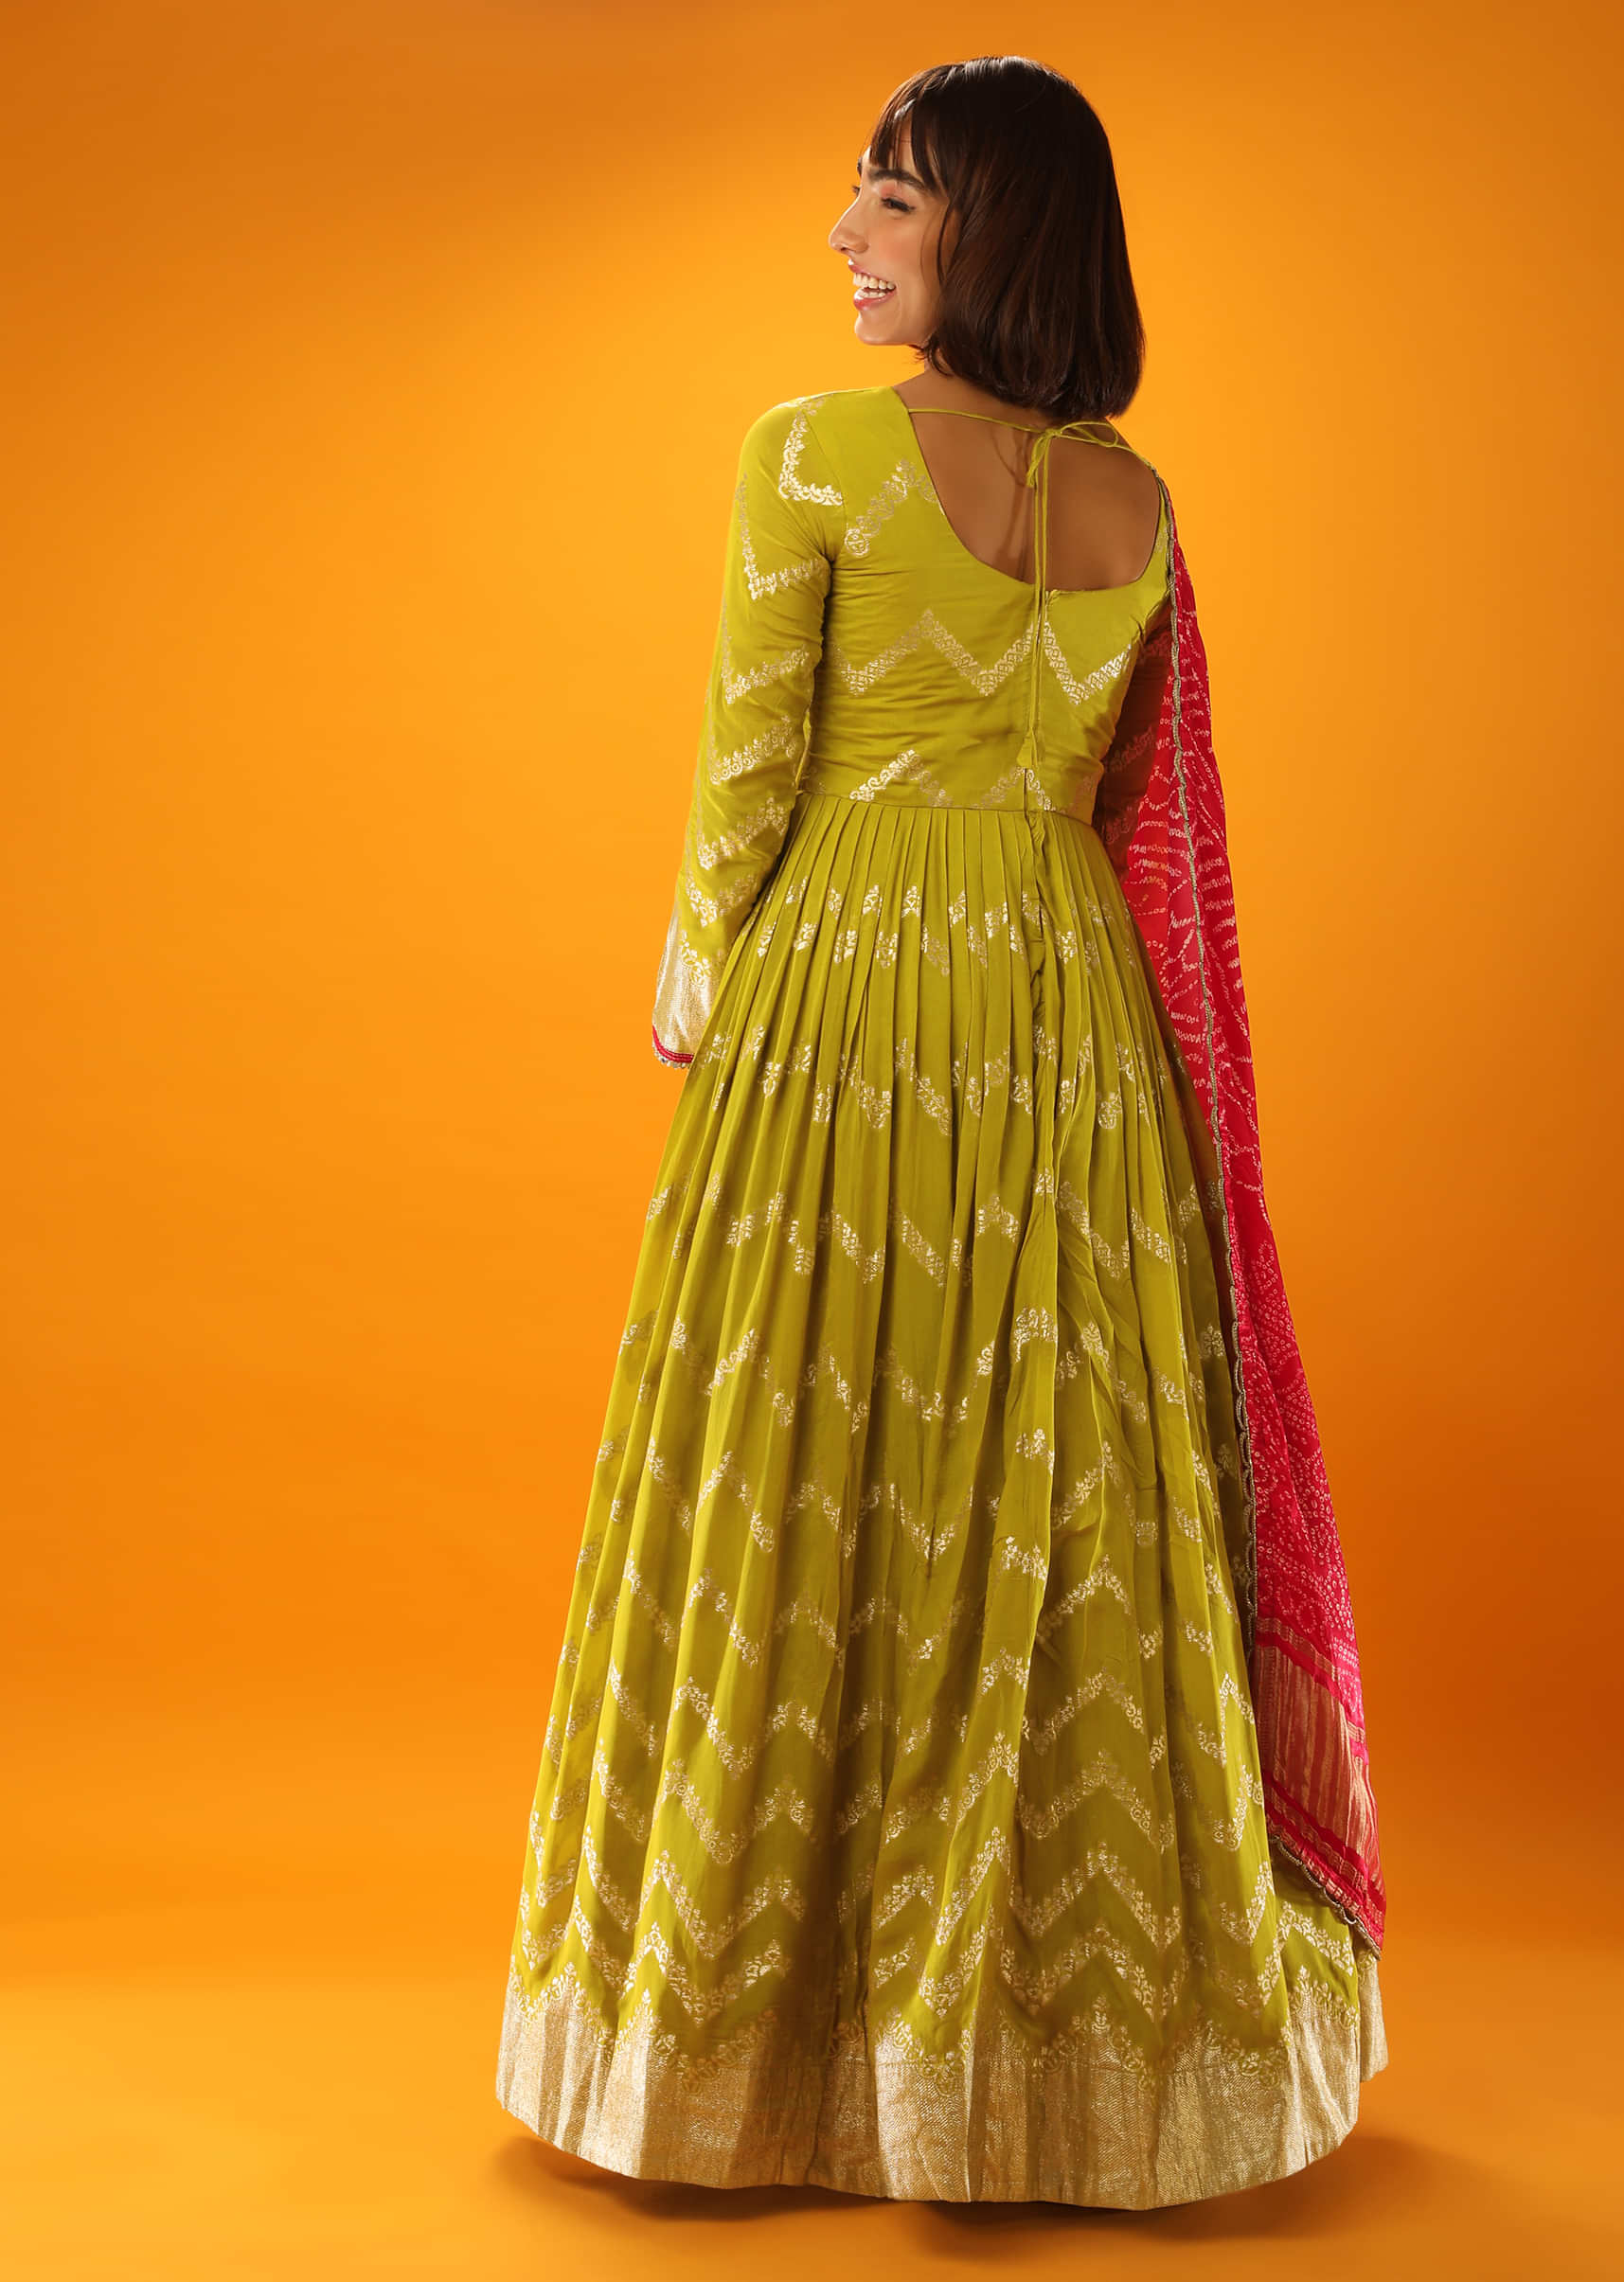 Warm Olive Anarkali Suit With Lurex Woven Chevron Design And Red Bandhani Dupatta  